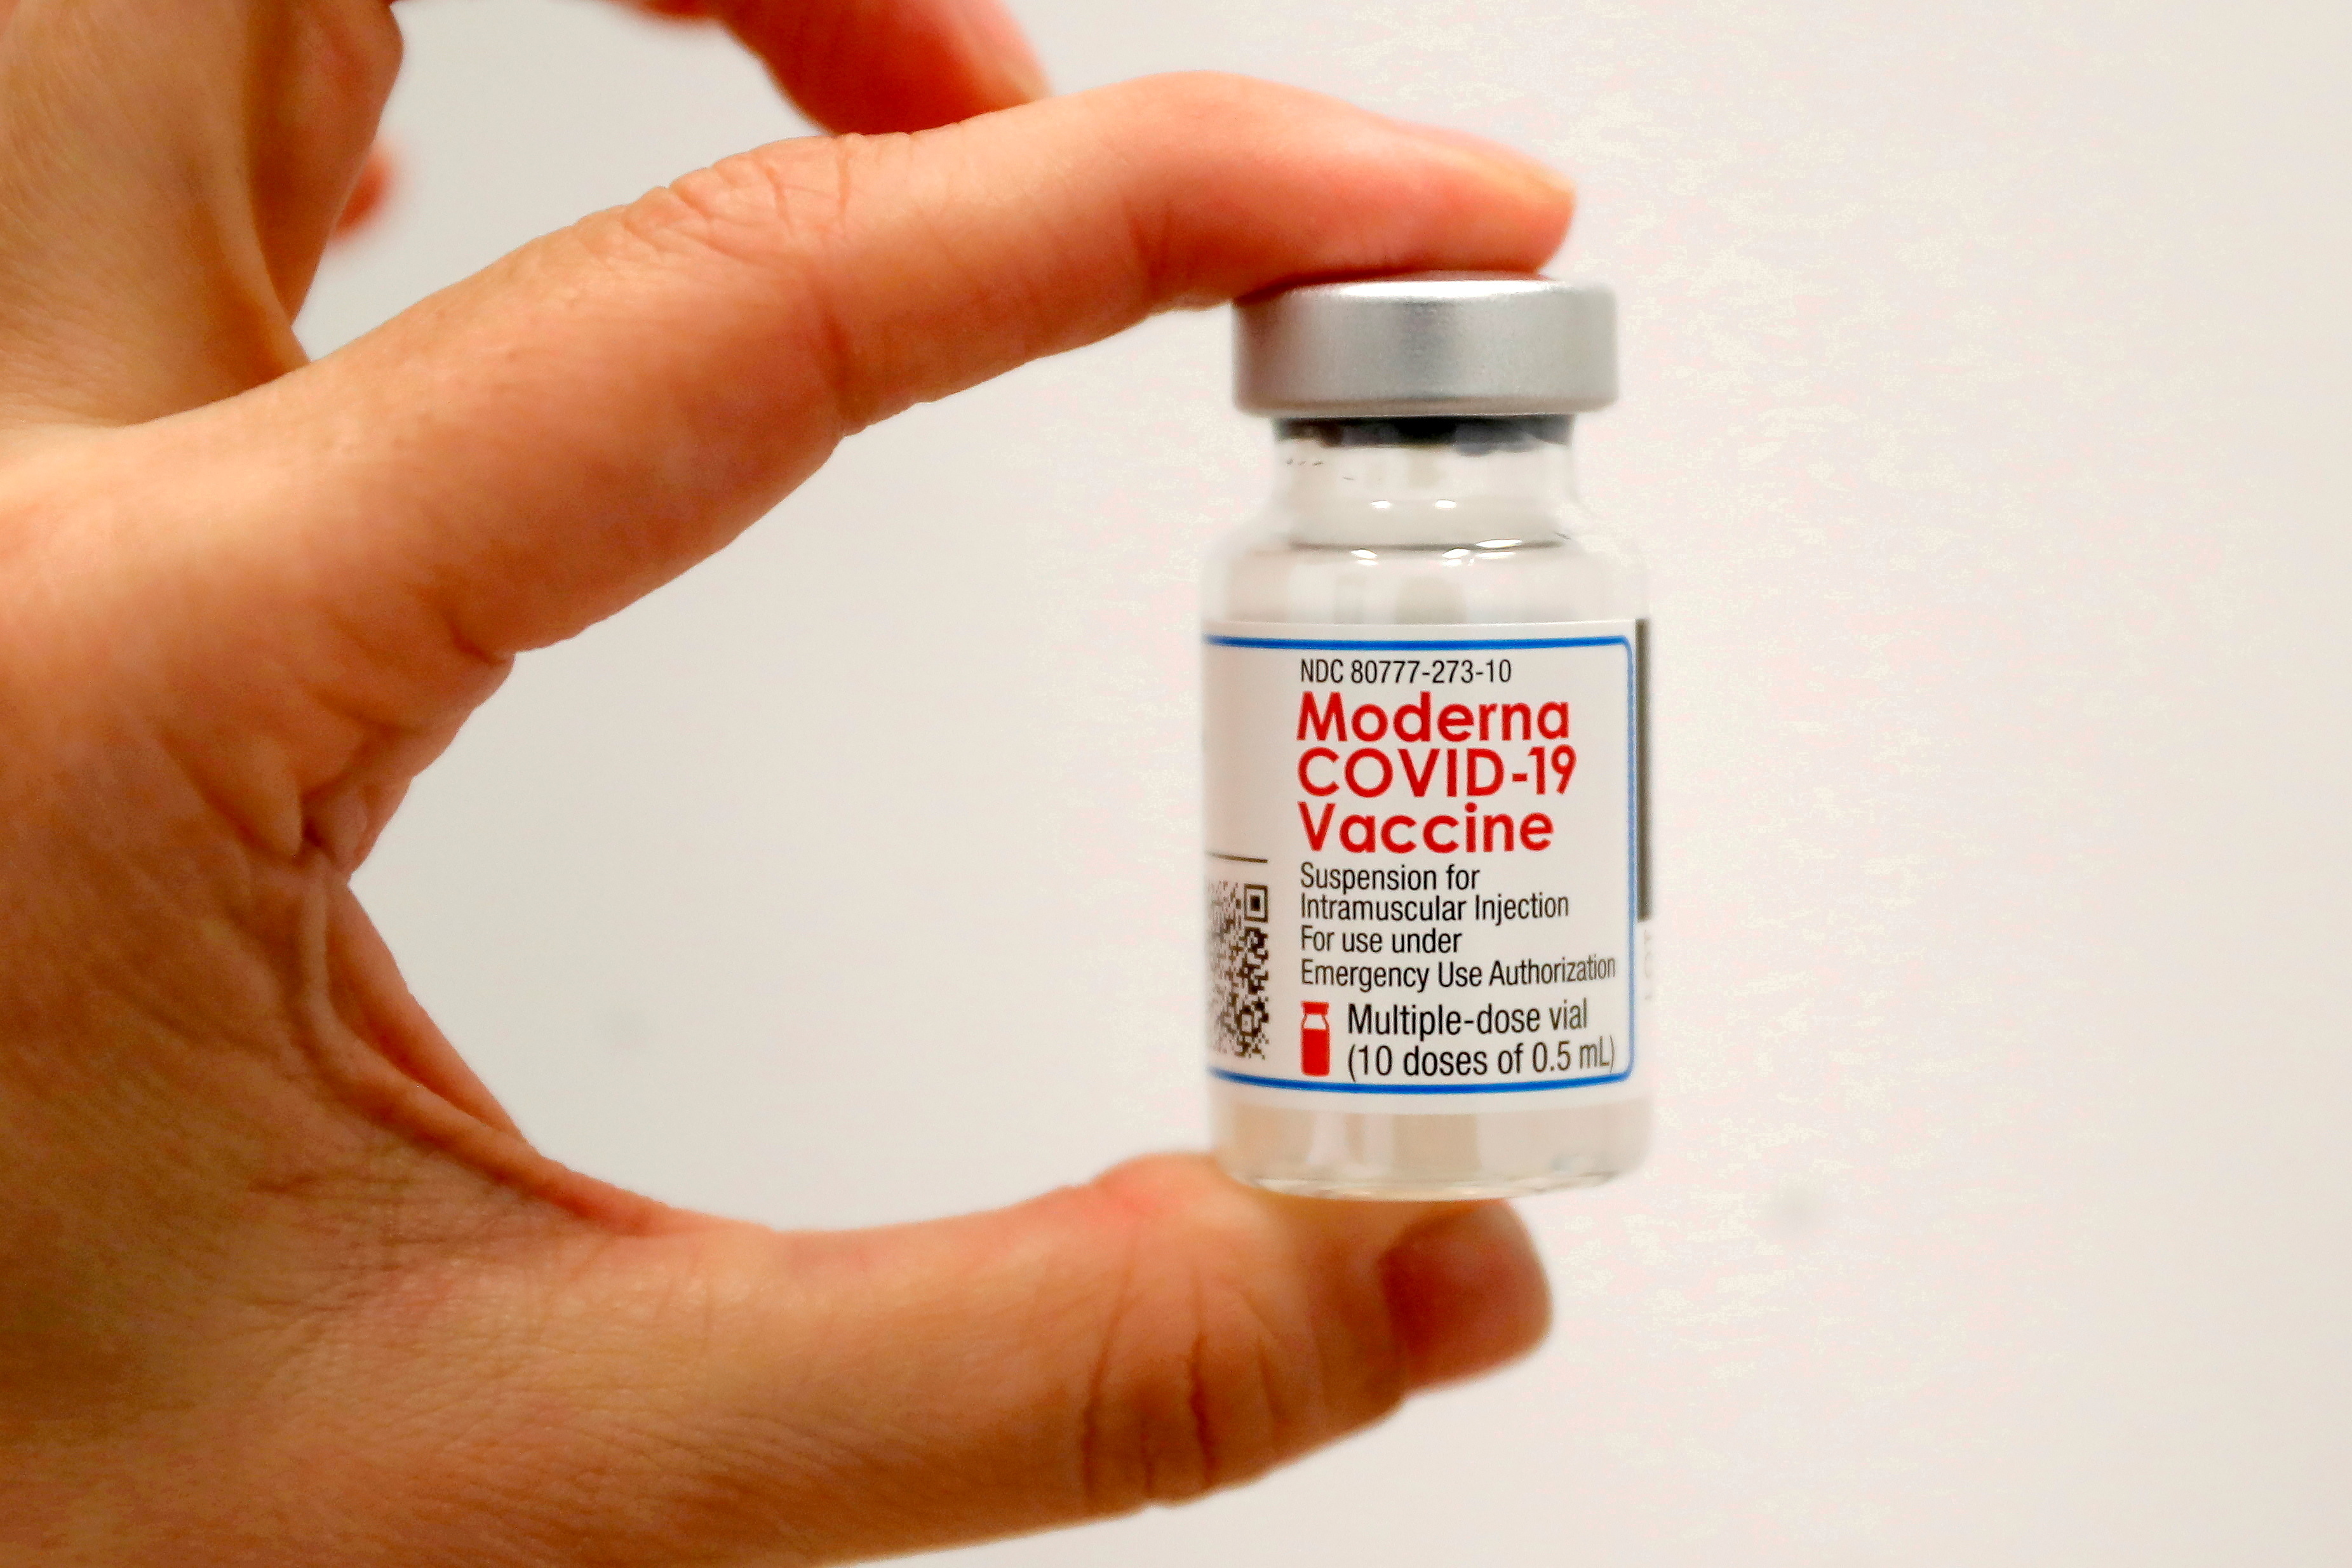 A healthcare worker holds a vial of the Moderna COVID-19 vaccine at a pop-up vaccination site operated by SOMOS Community Care during the coronavirus disease (COVID-19) pandemic in Manhattan in New York City, New York, U.S., January 29, 2021. REUTERS/Mike Segar//File Photo